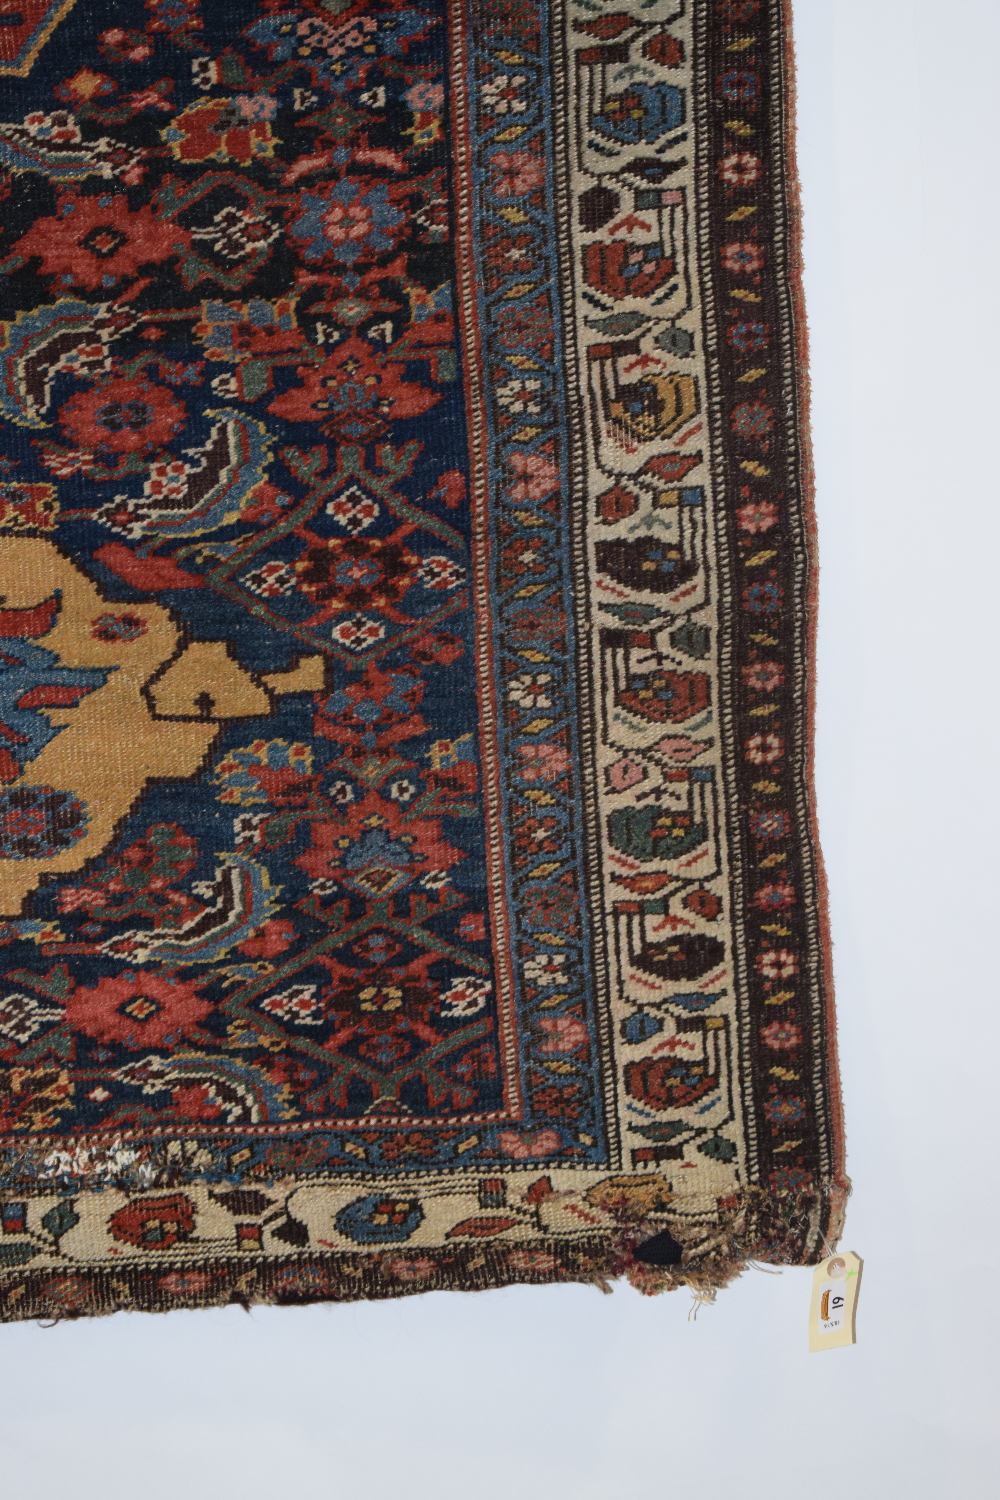 Bijar rug, north west Persia, circa 1920s, 6ft. 7in. x 4ft. 2.01m. x 1.22m. Overall wear; crude - Image 2 of 12